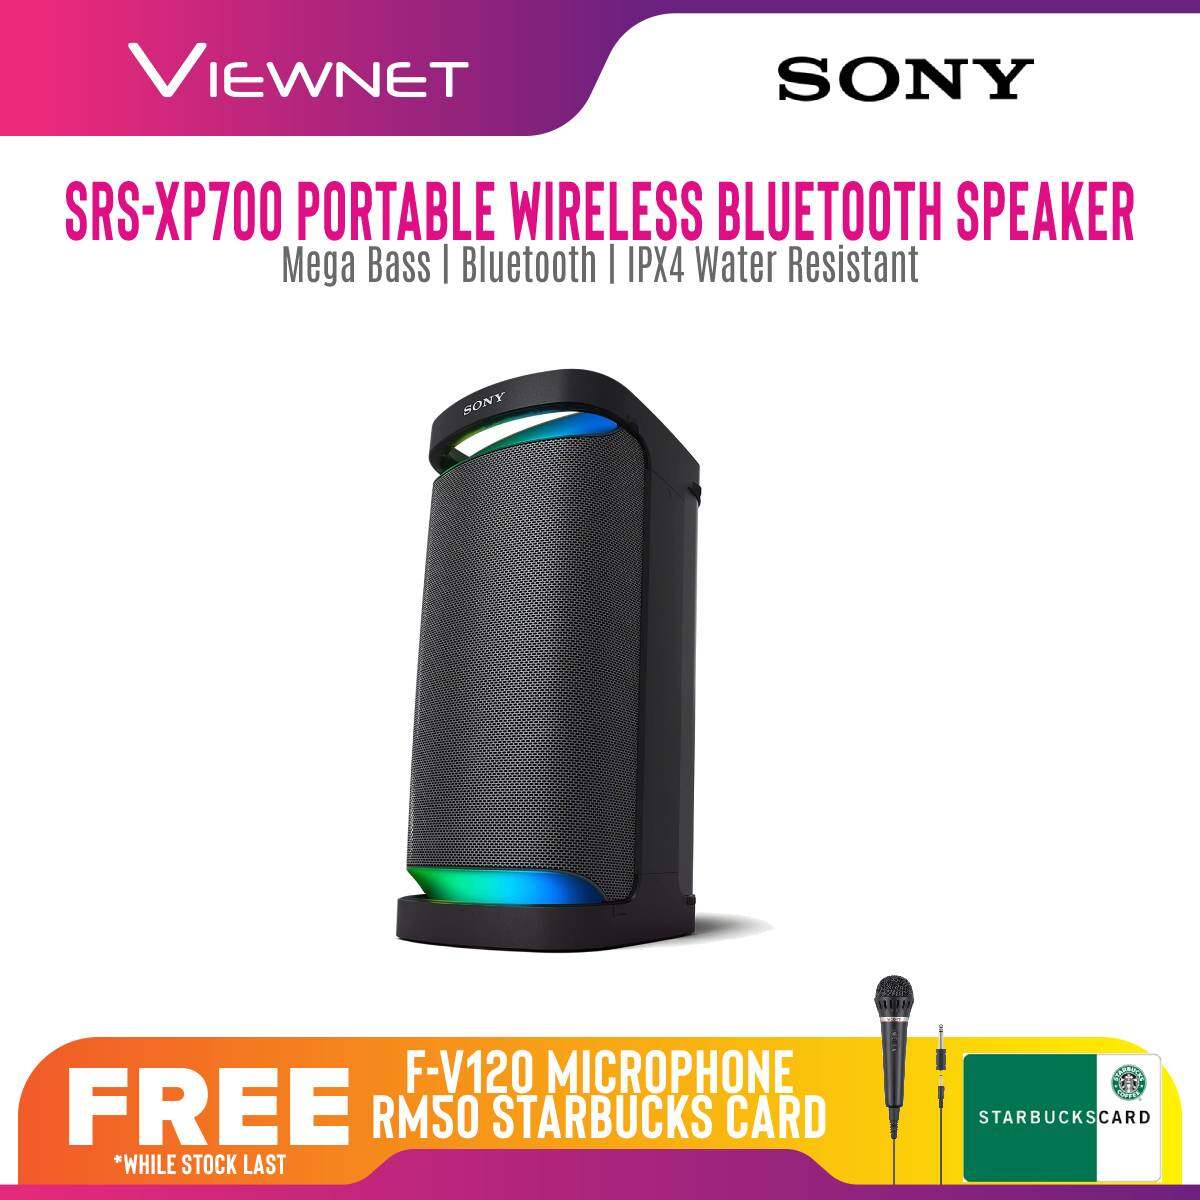 [PRE-ORDER] [NEW LAUNCH] Sony SRS-XP700 Series Portable Wireless Bluetooth Speaker with Extra Bass , IPX Water Resistant + (Free Gifts: F-V120 Microphone + RM50 Starbucks Card(While Stock Last ) (ETA: 2021-08-04)